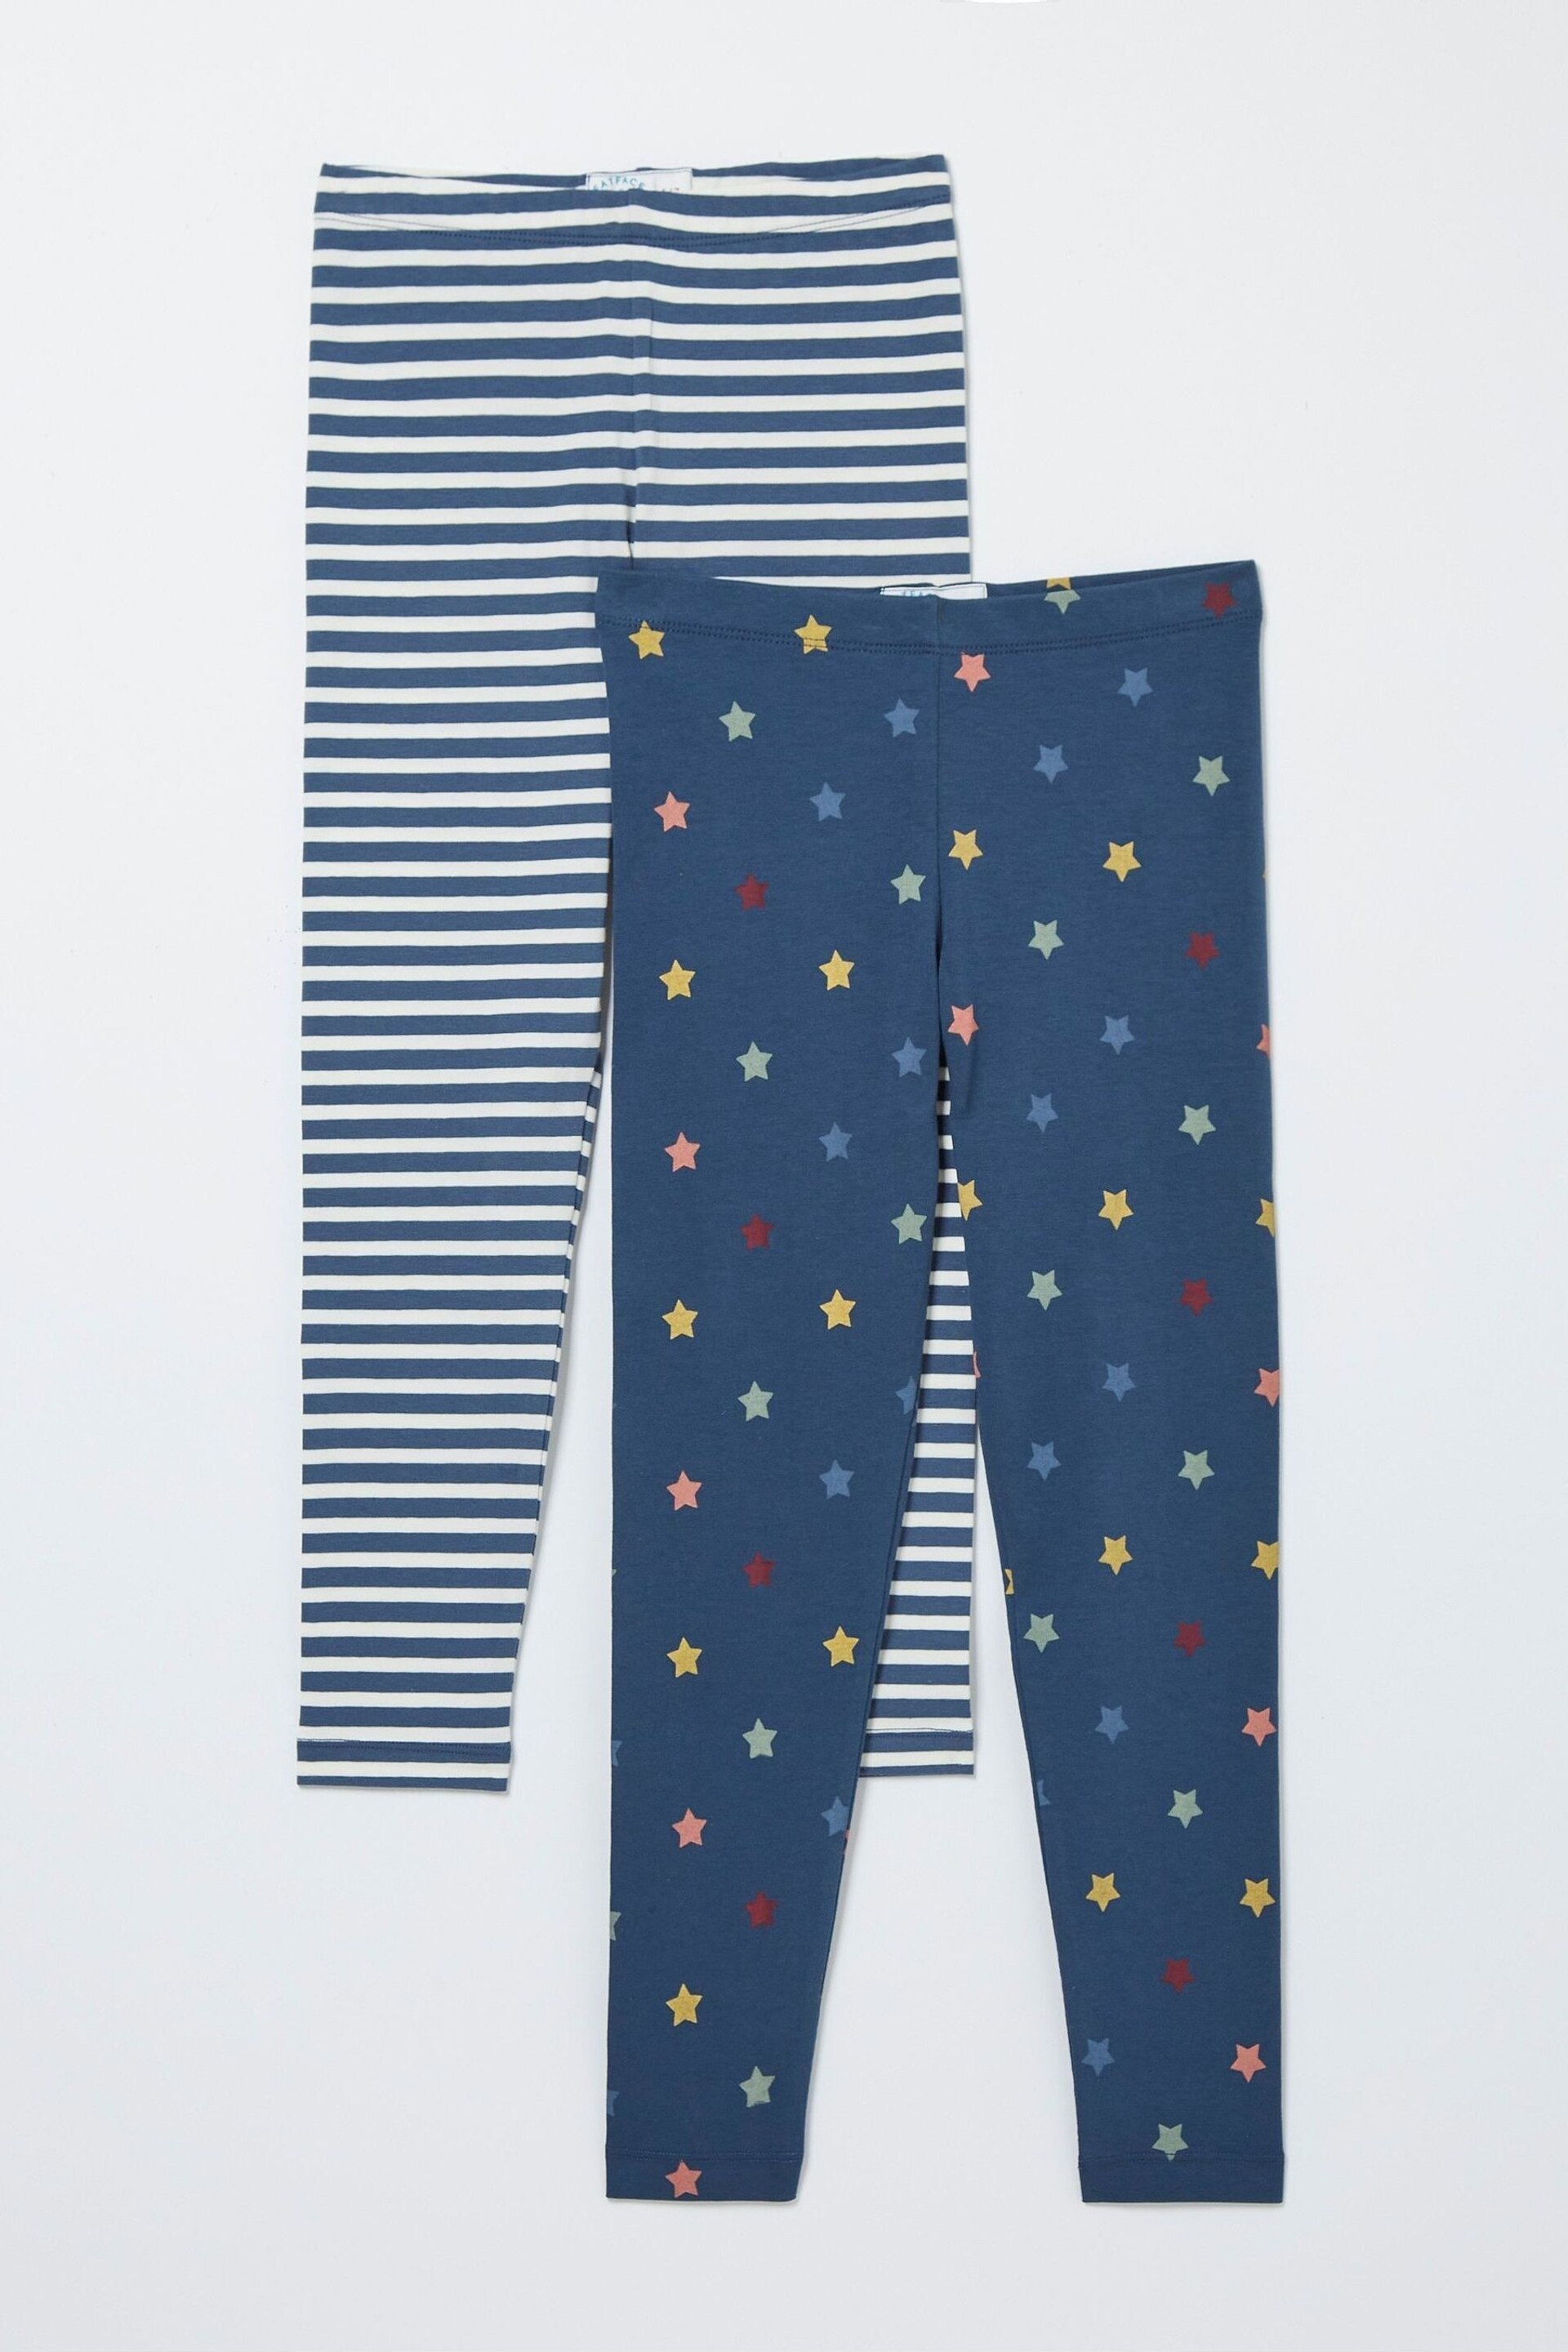 FatFace Red Star And Stripe Leggings - Image 1 of 6